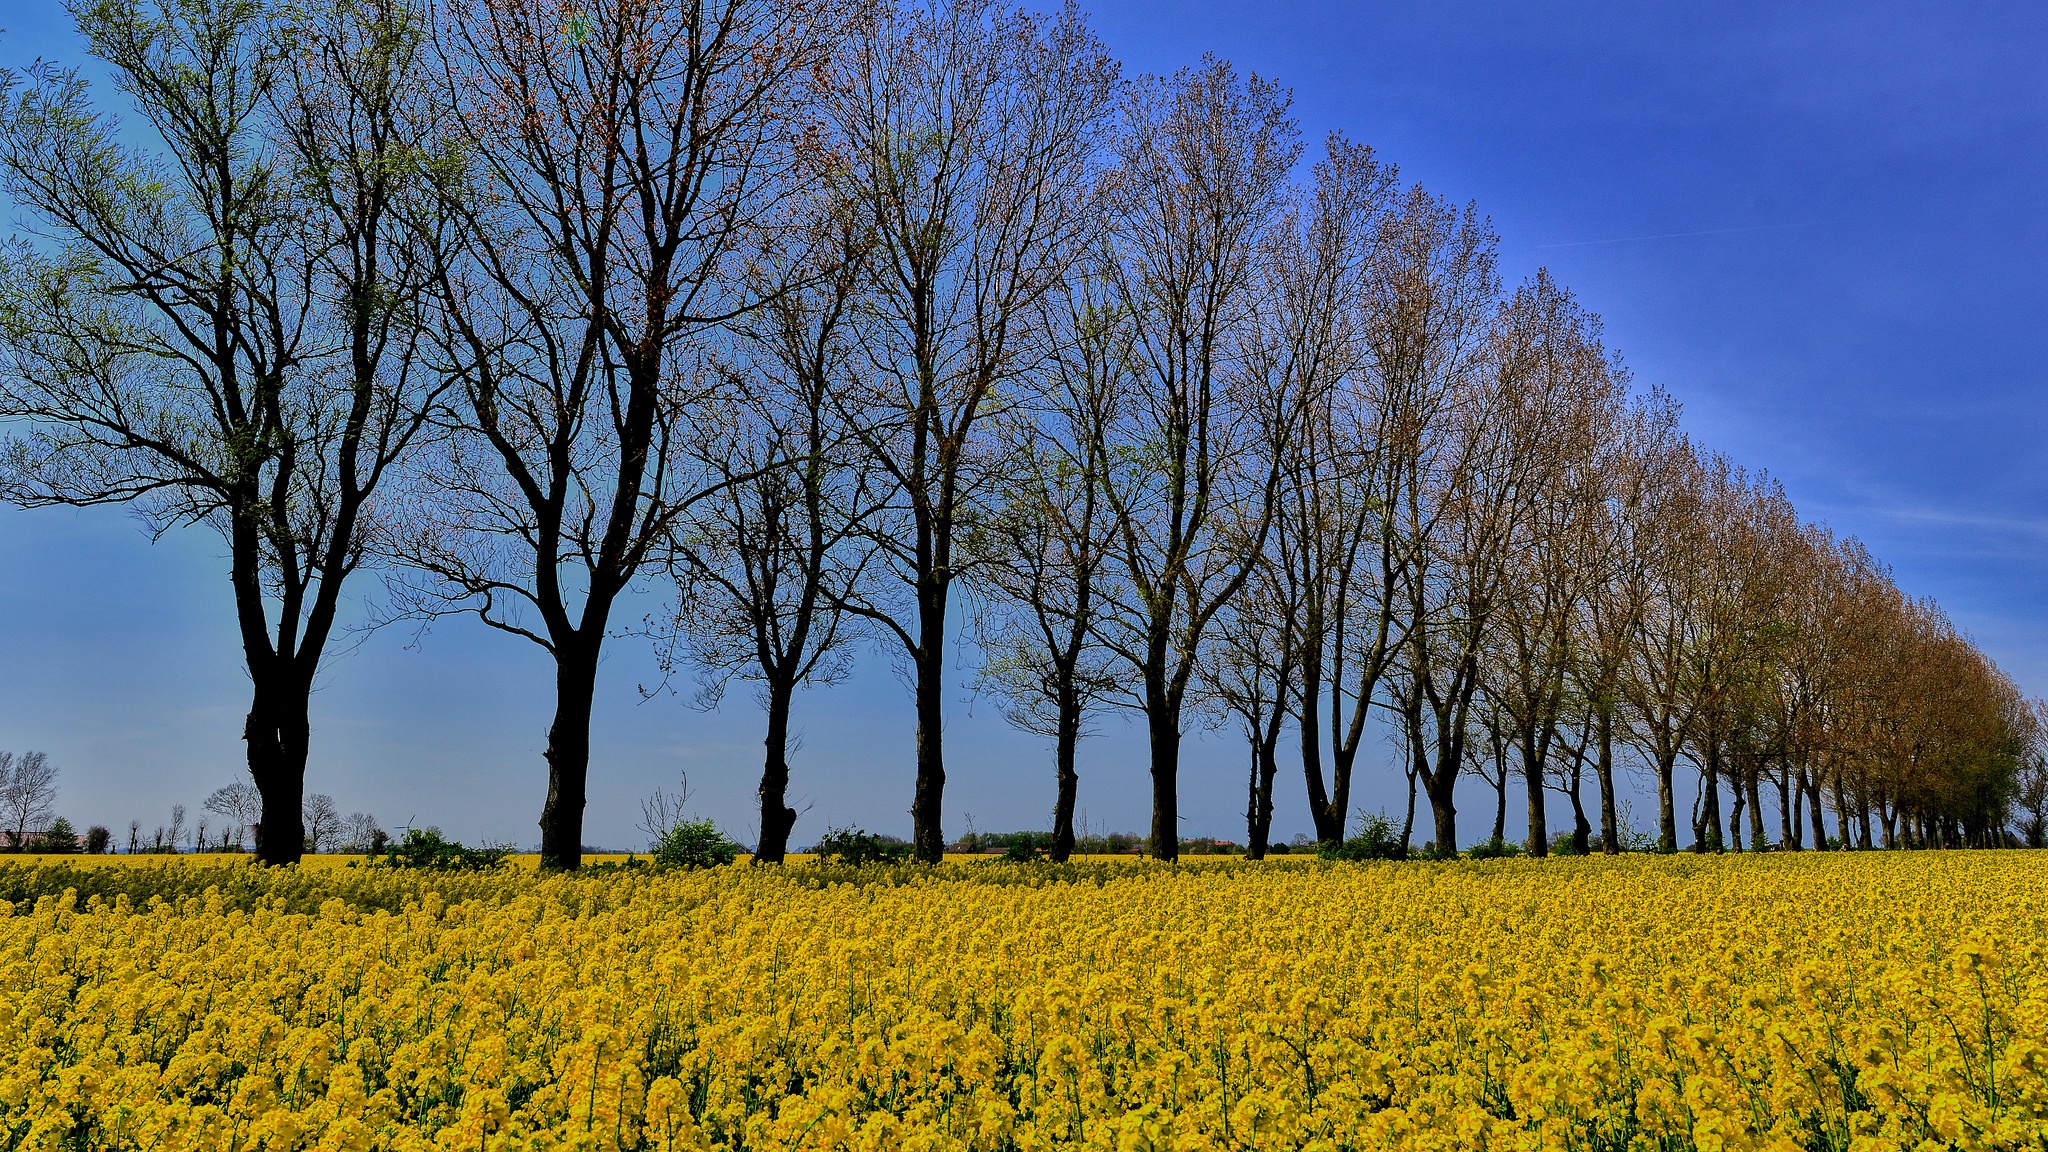  Rapeseed Windows Backgrounds